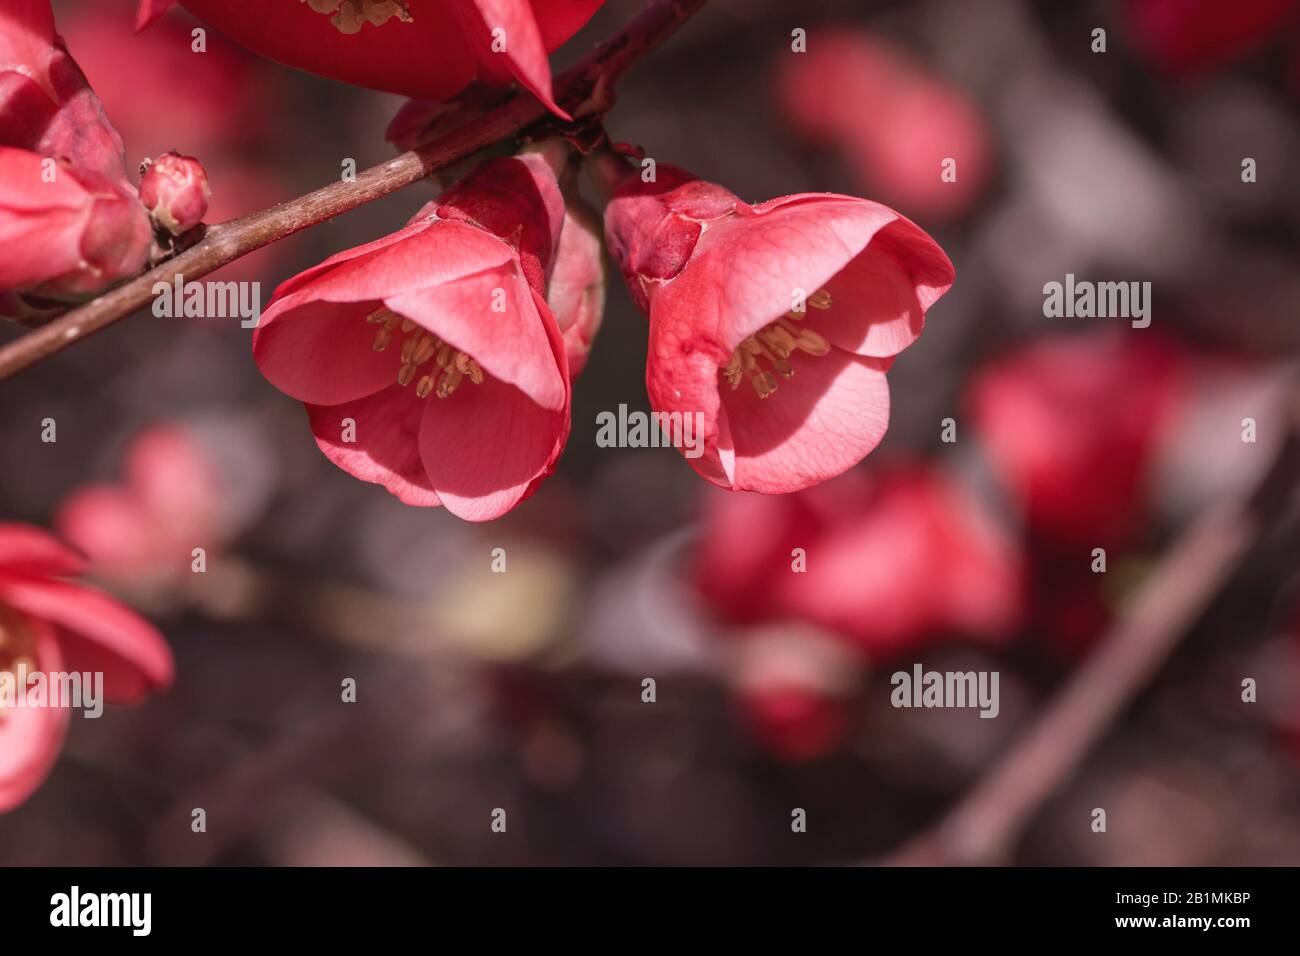 Chaenomeles japonica or maules quince flowers blooming Stock Photo